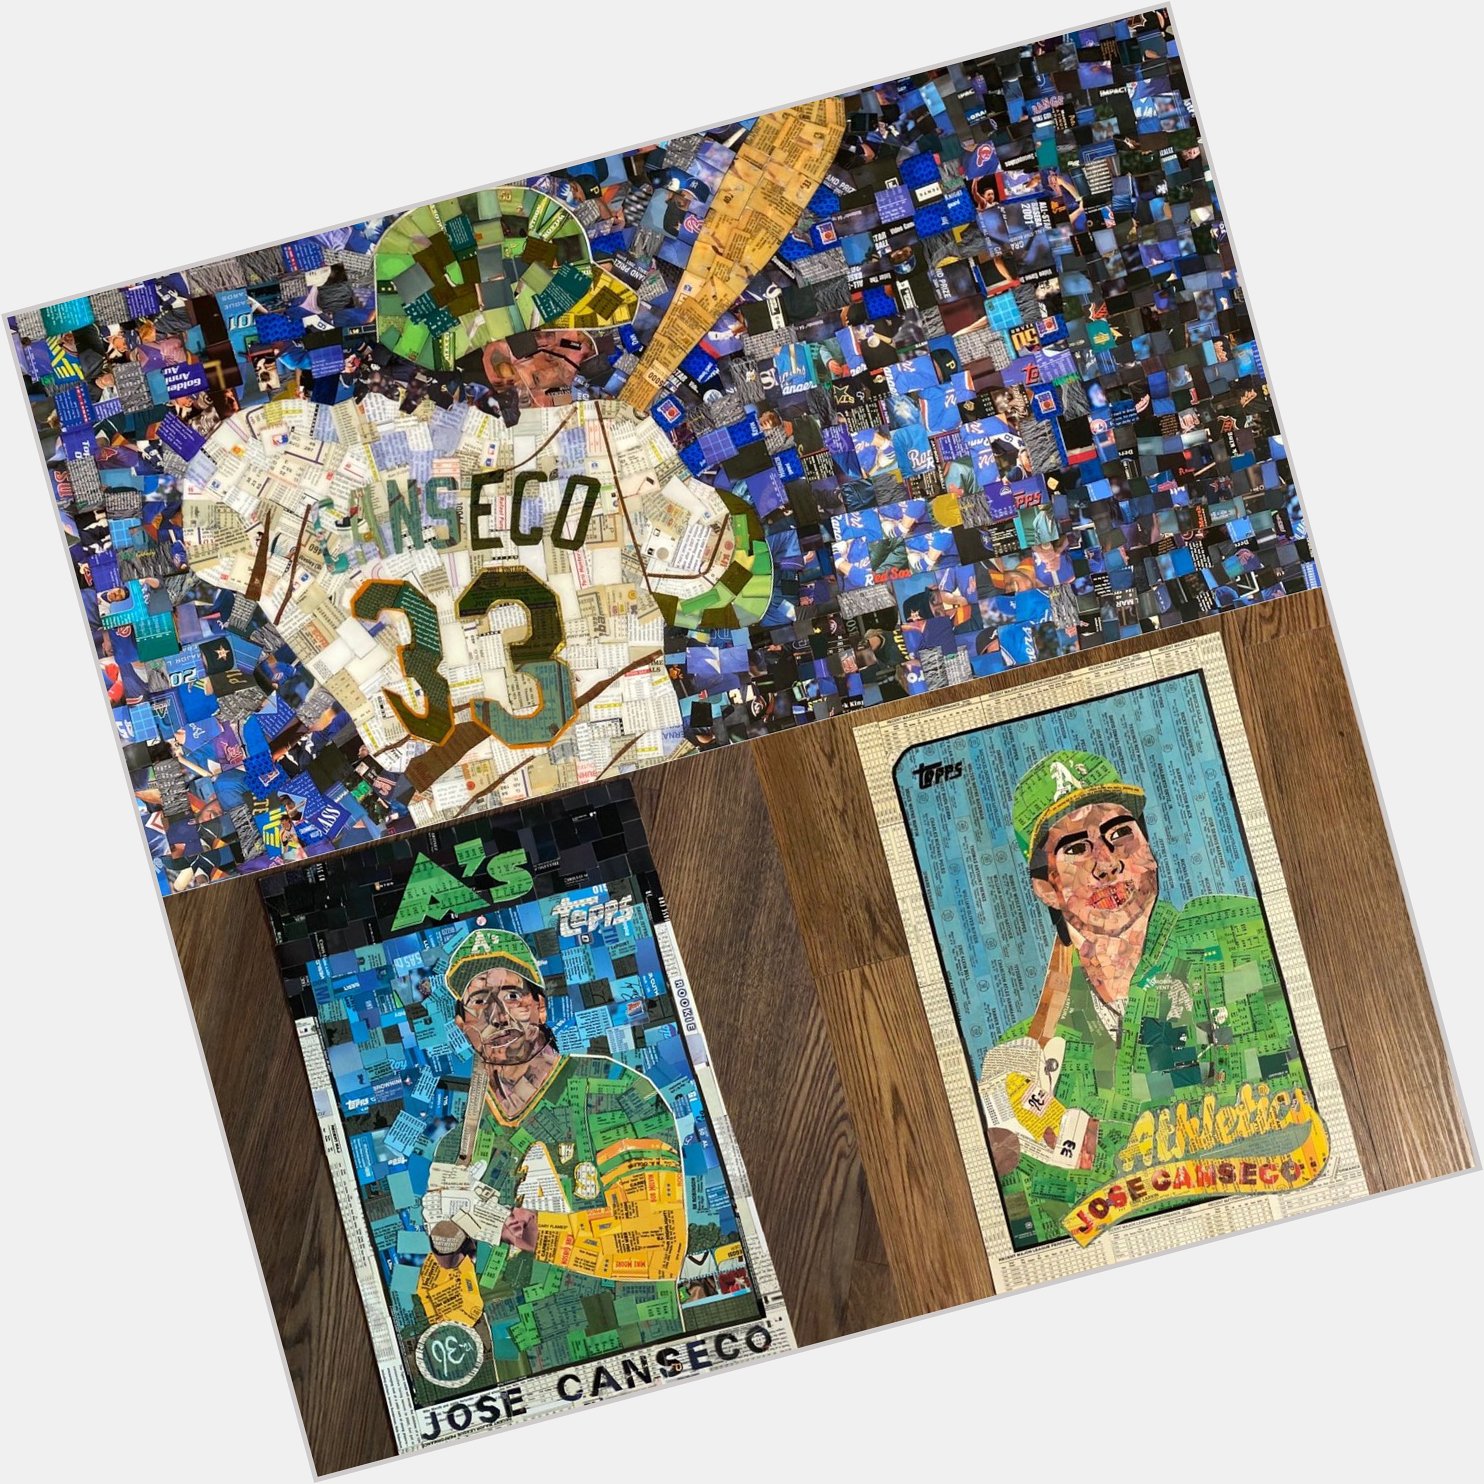 Happy belated birthday to one of my frequent and favorite art subjects, the incomparable Jose Canseco! 